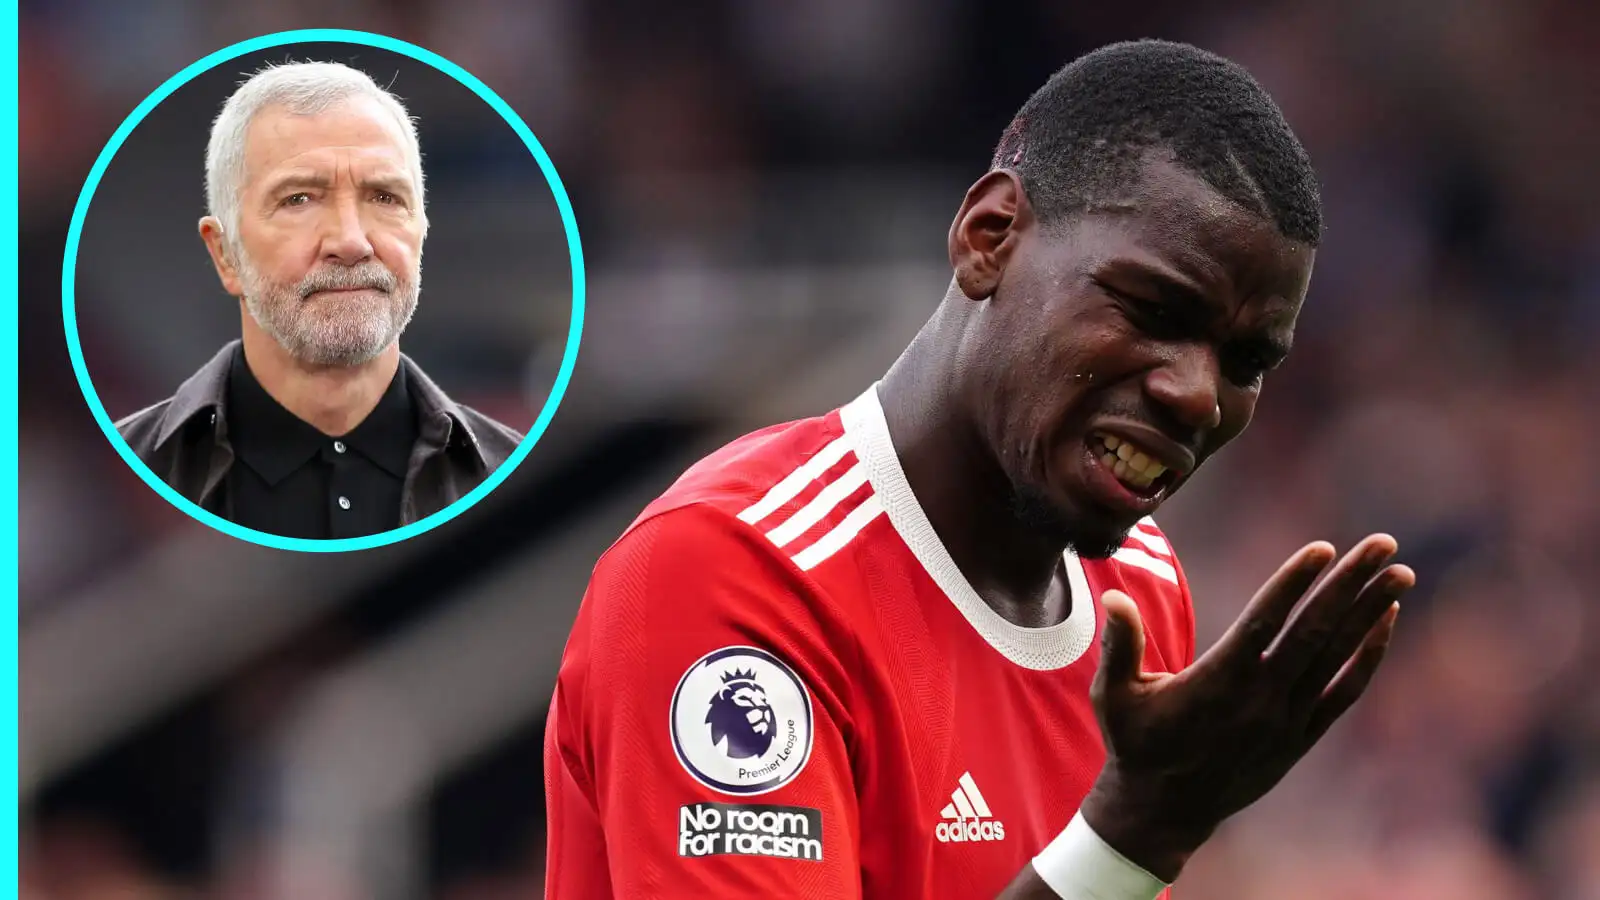 Graeme Souness slams ‘stinking attitude’ of Paul Pogba as he could’ve become ‘one of the greats’